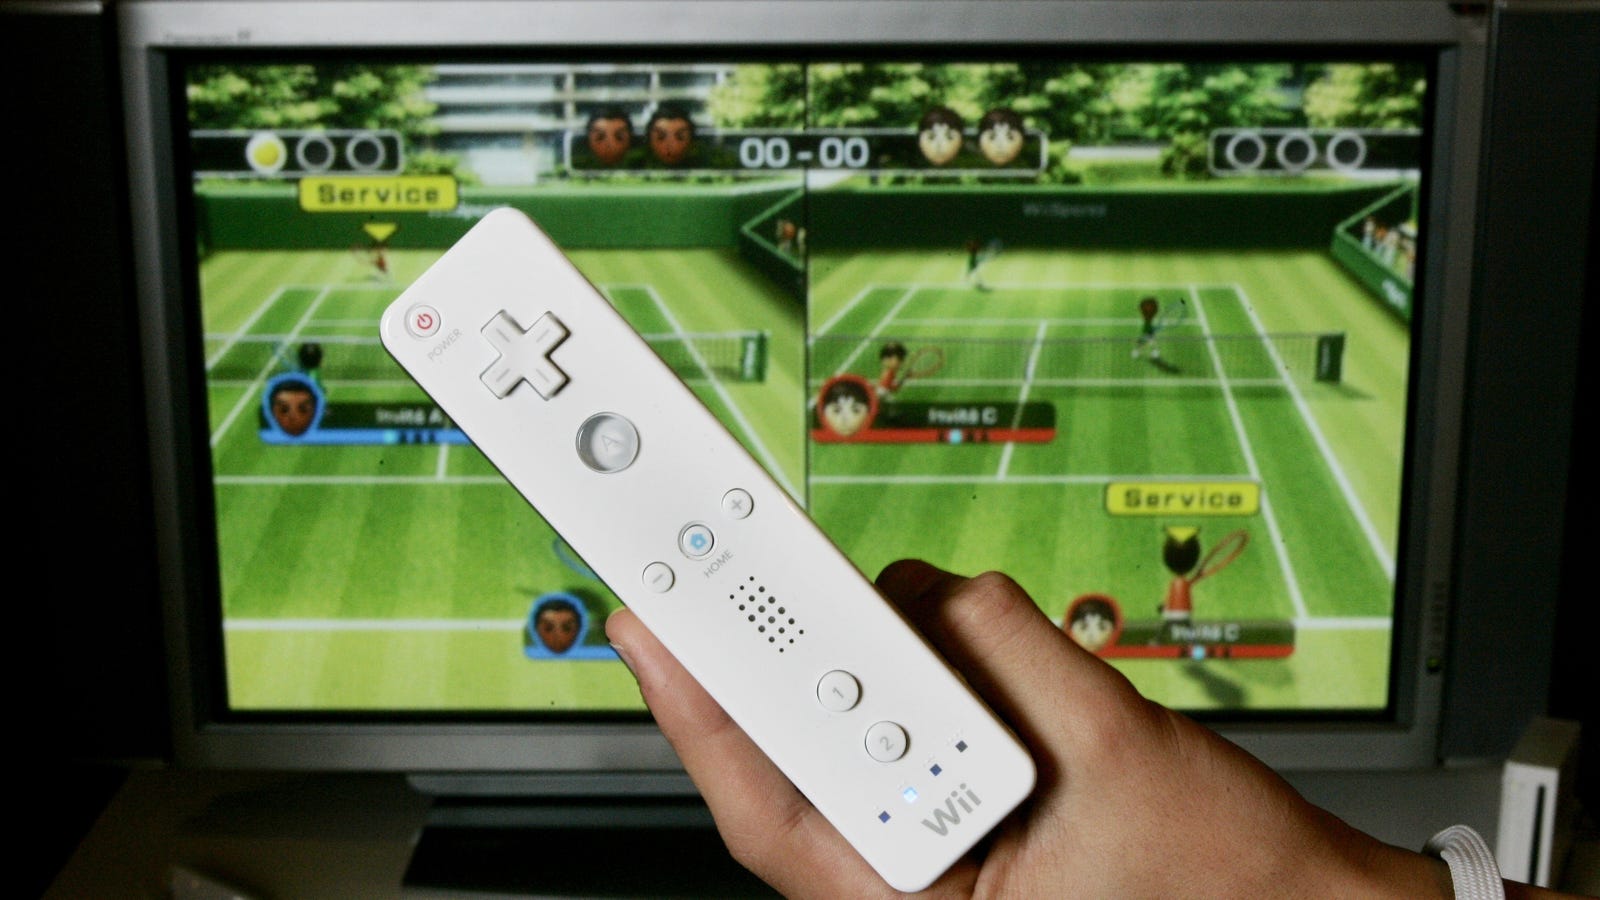 Nintendo Loses 10 Million Lawsuit Over Wii Remote Technology